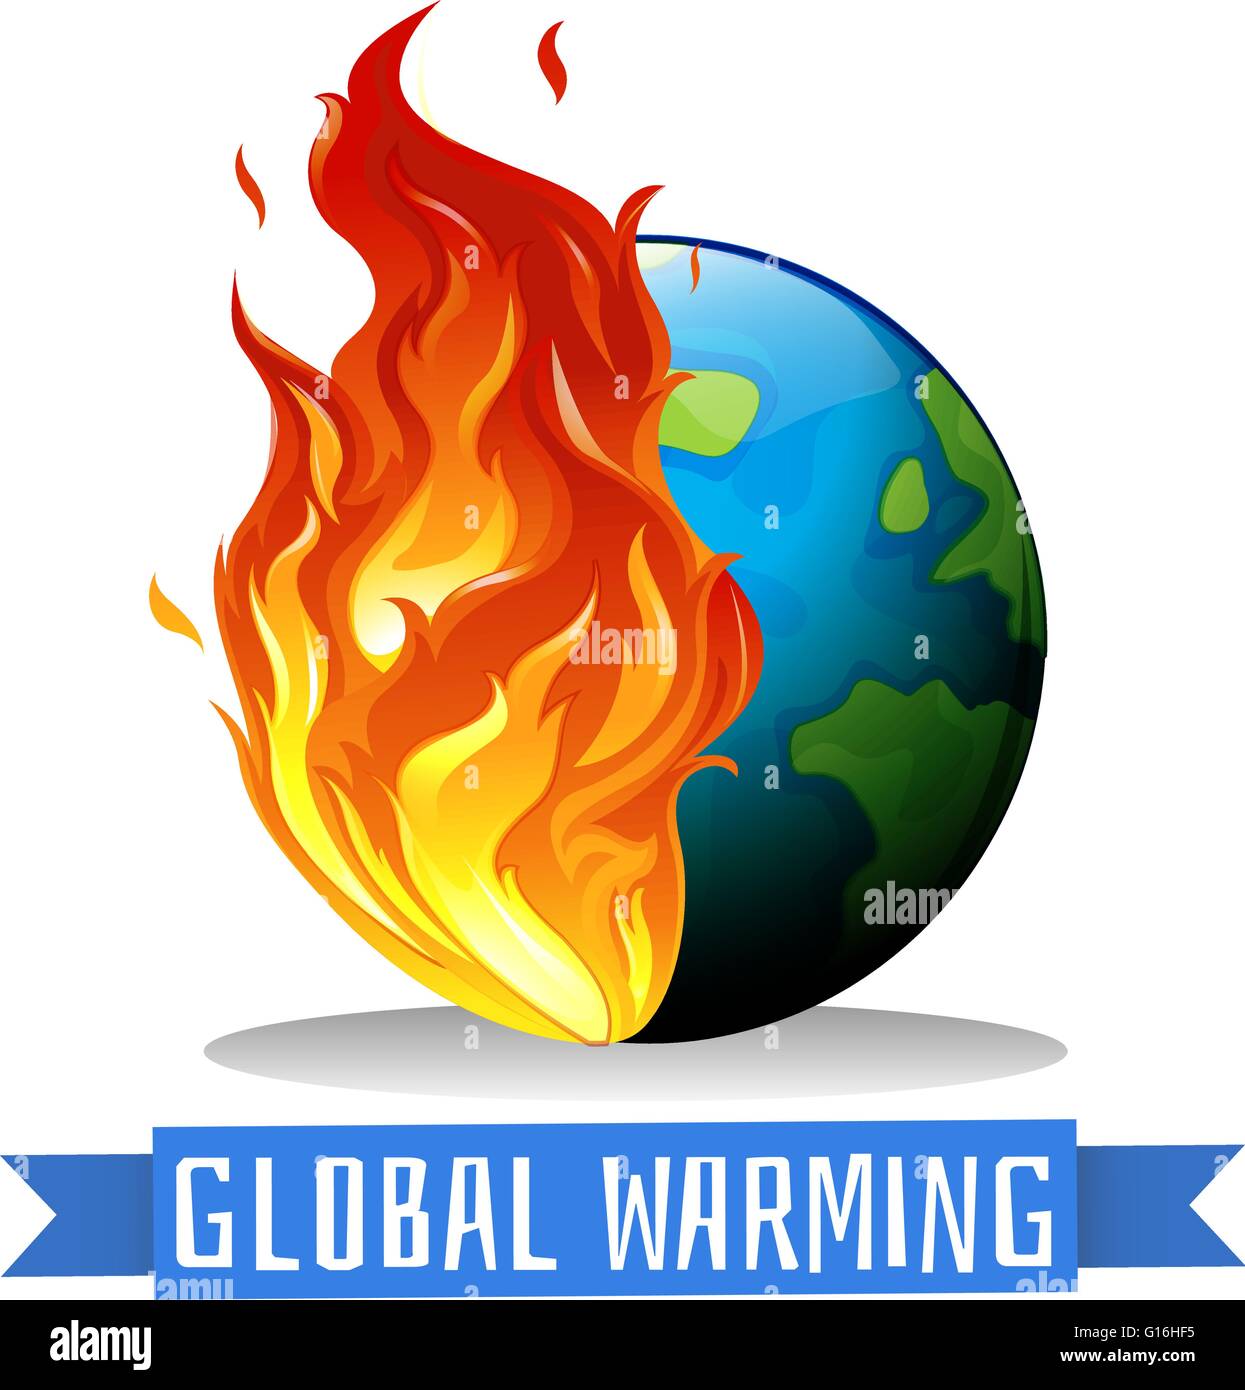 Global warming with earth on flame illustration Stock Vector